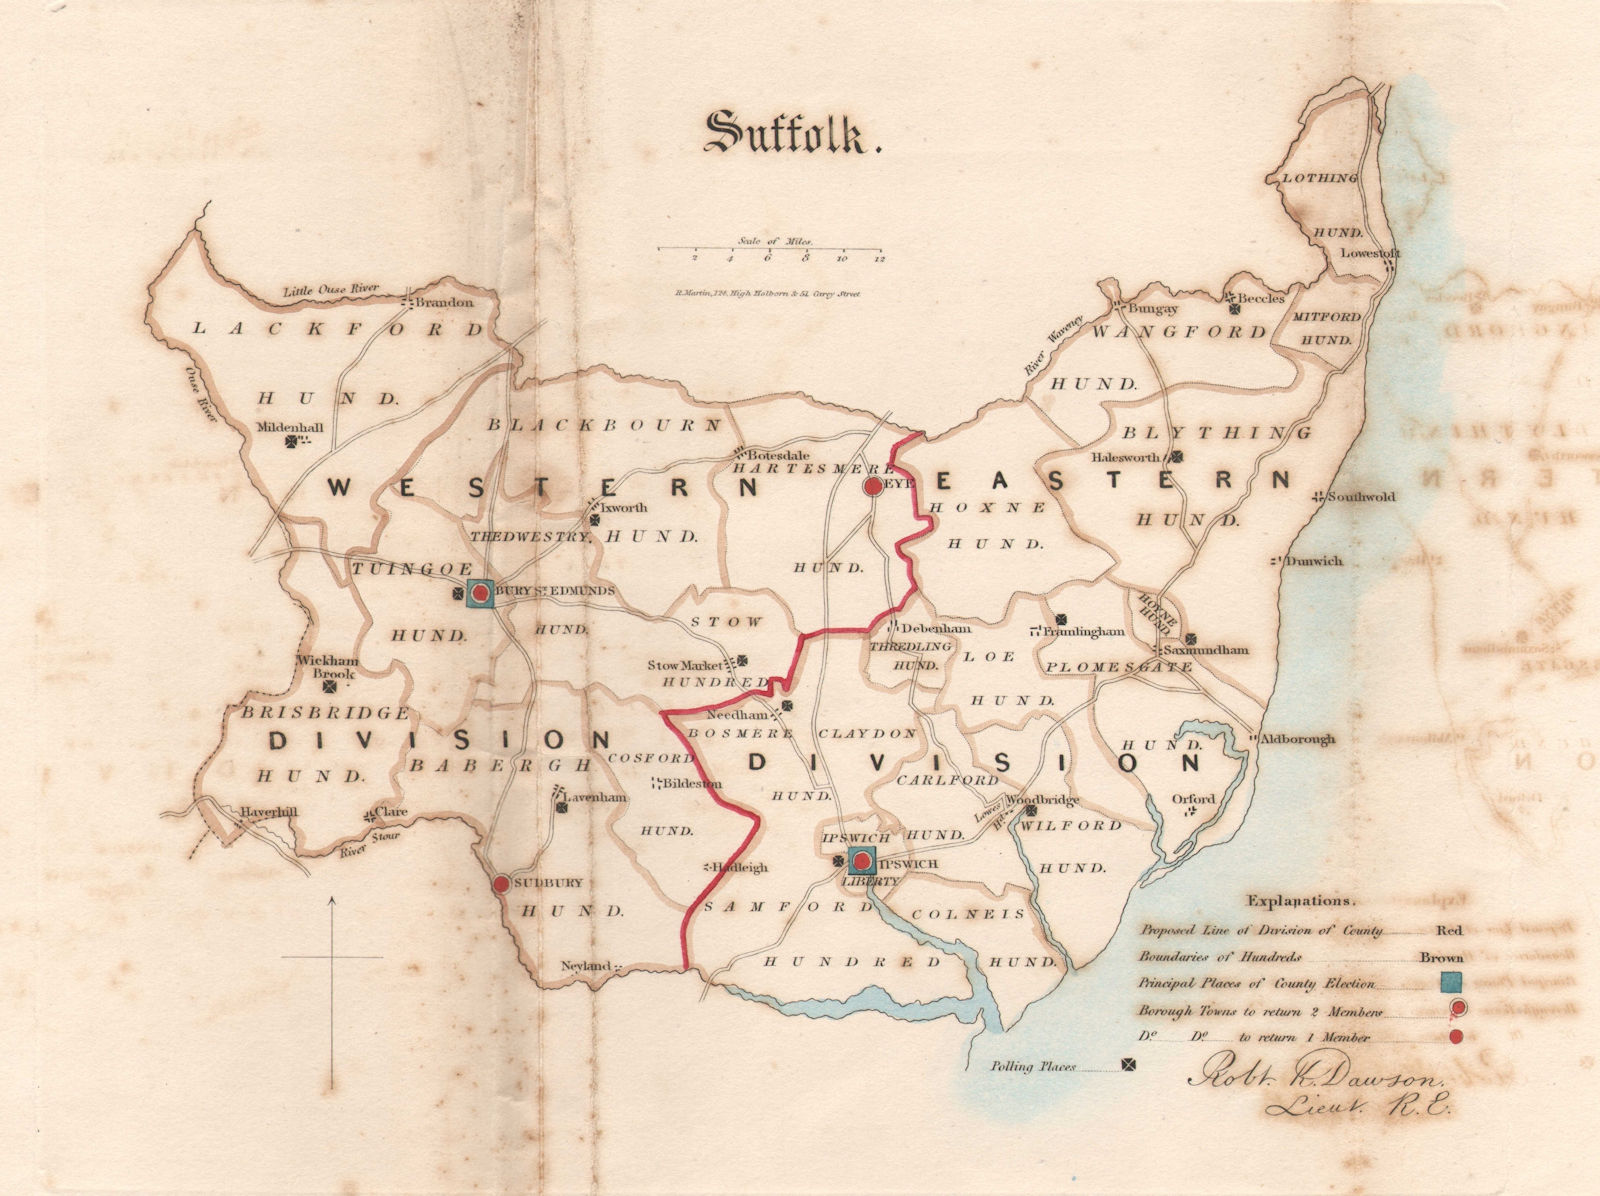 Suffolk county map. Divisions electoral boroughs. REFORM ACT. DAWSON 1832